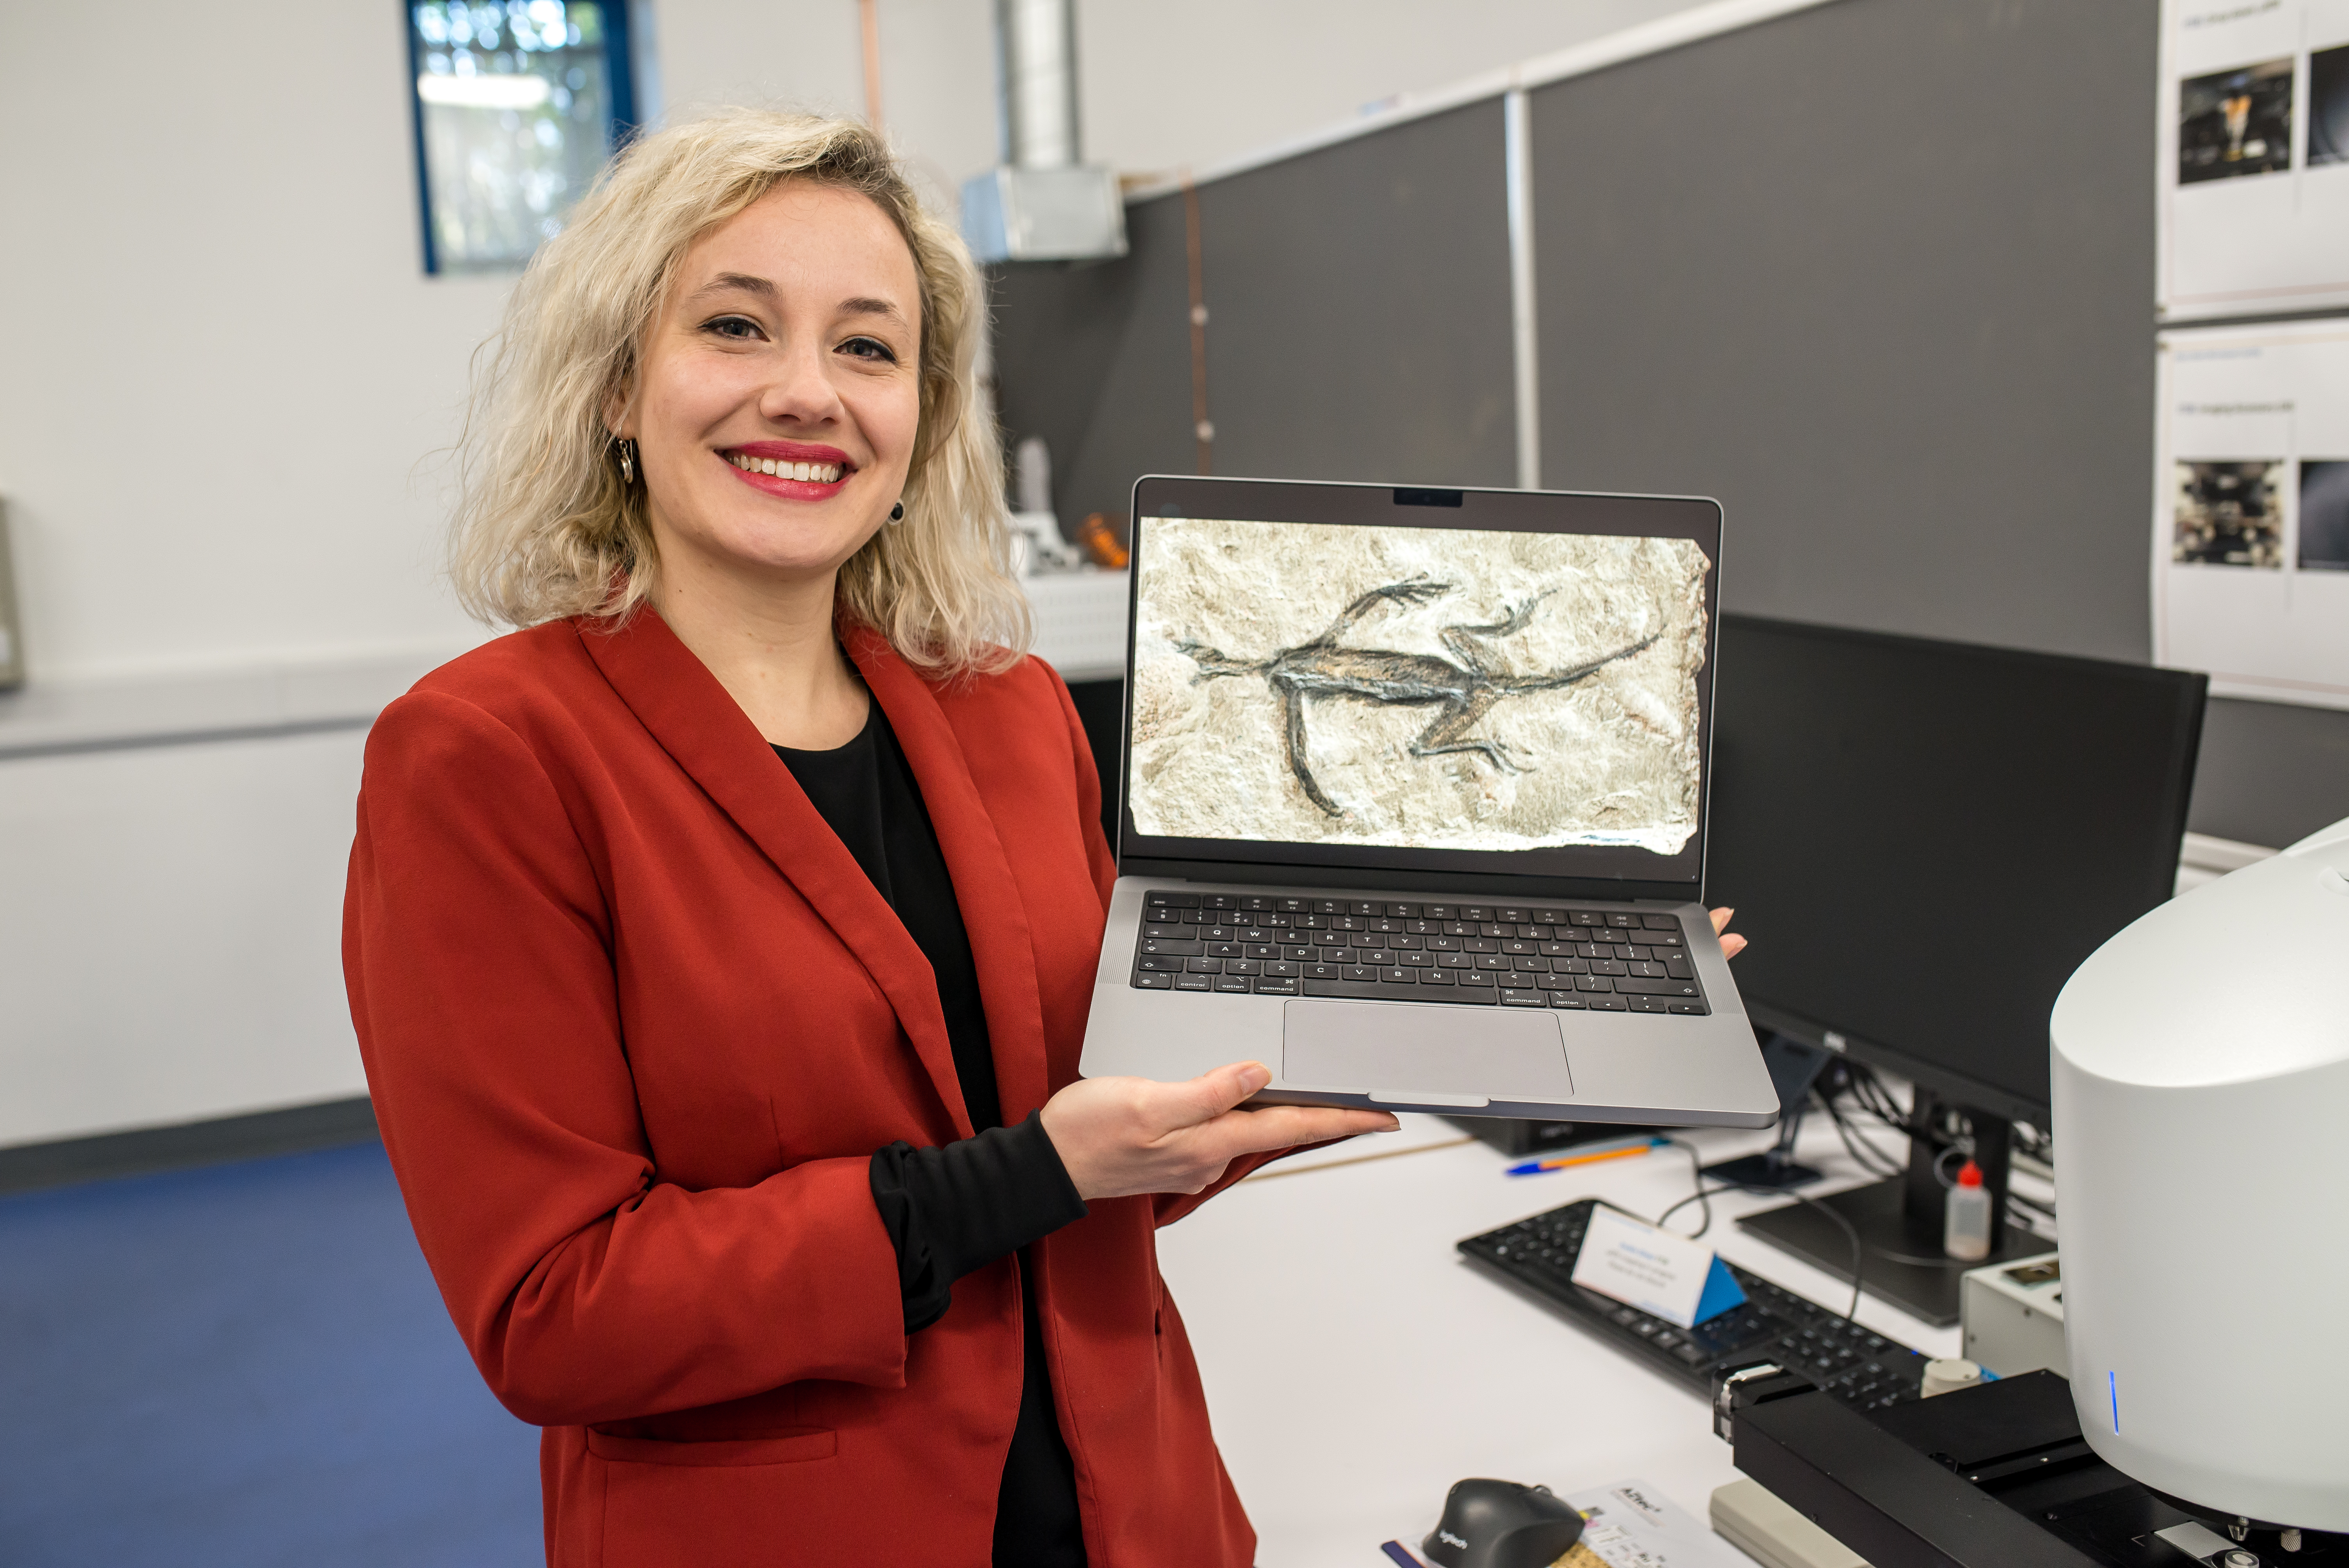 Dr Valentina Rossi of University College Cork, Ireland, who led the research team which discovered that a 280-million-year-old lizard fossil is, in part, a forgery. (Image credit: Zixiao Yang)